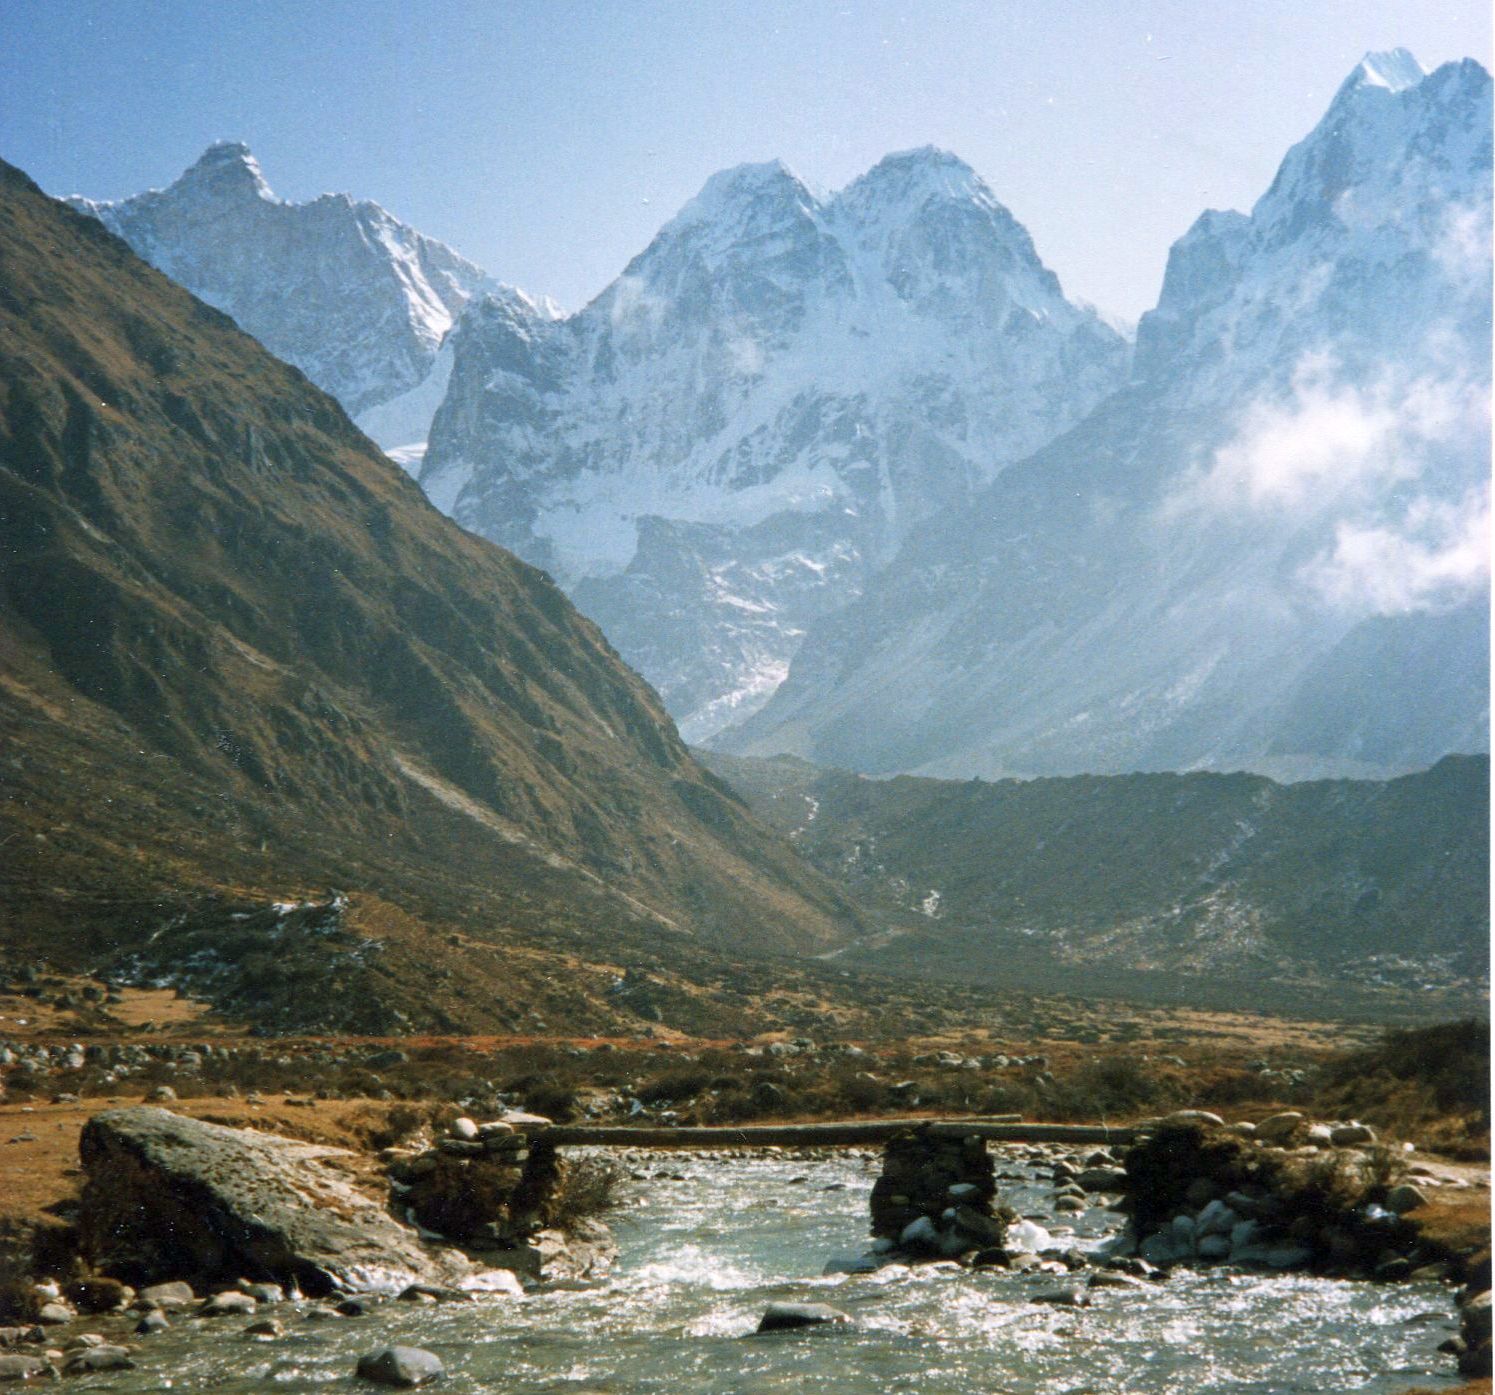 Mount Jannu ( Khumbakharna ) and Sobithongie from Kambachen in the Ghunsa Khola Valley on the North Side of Mount Kangchenjunga